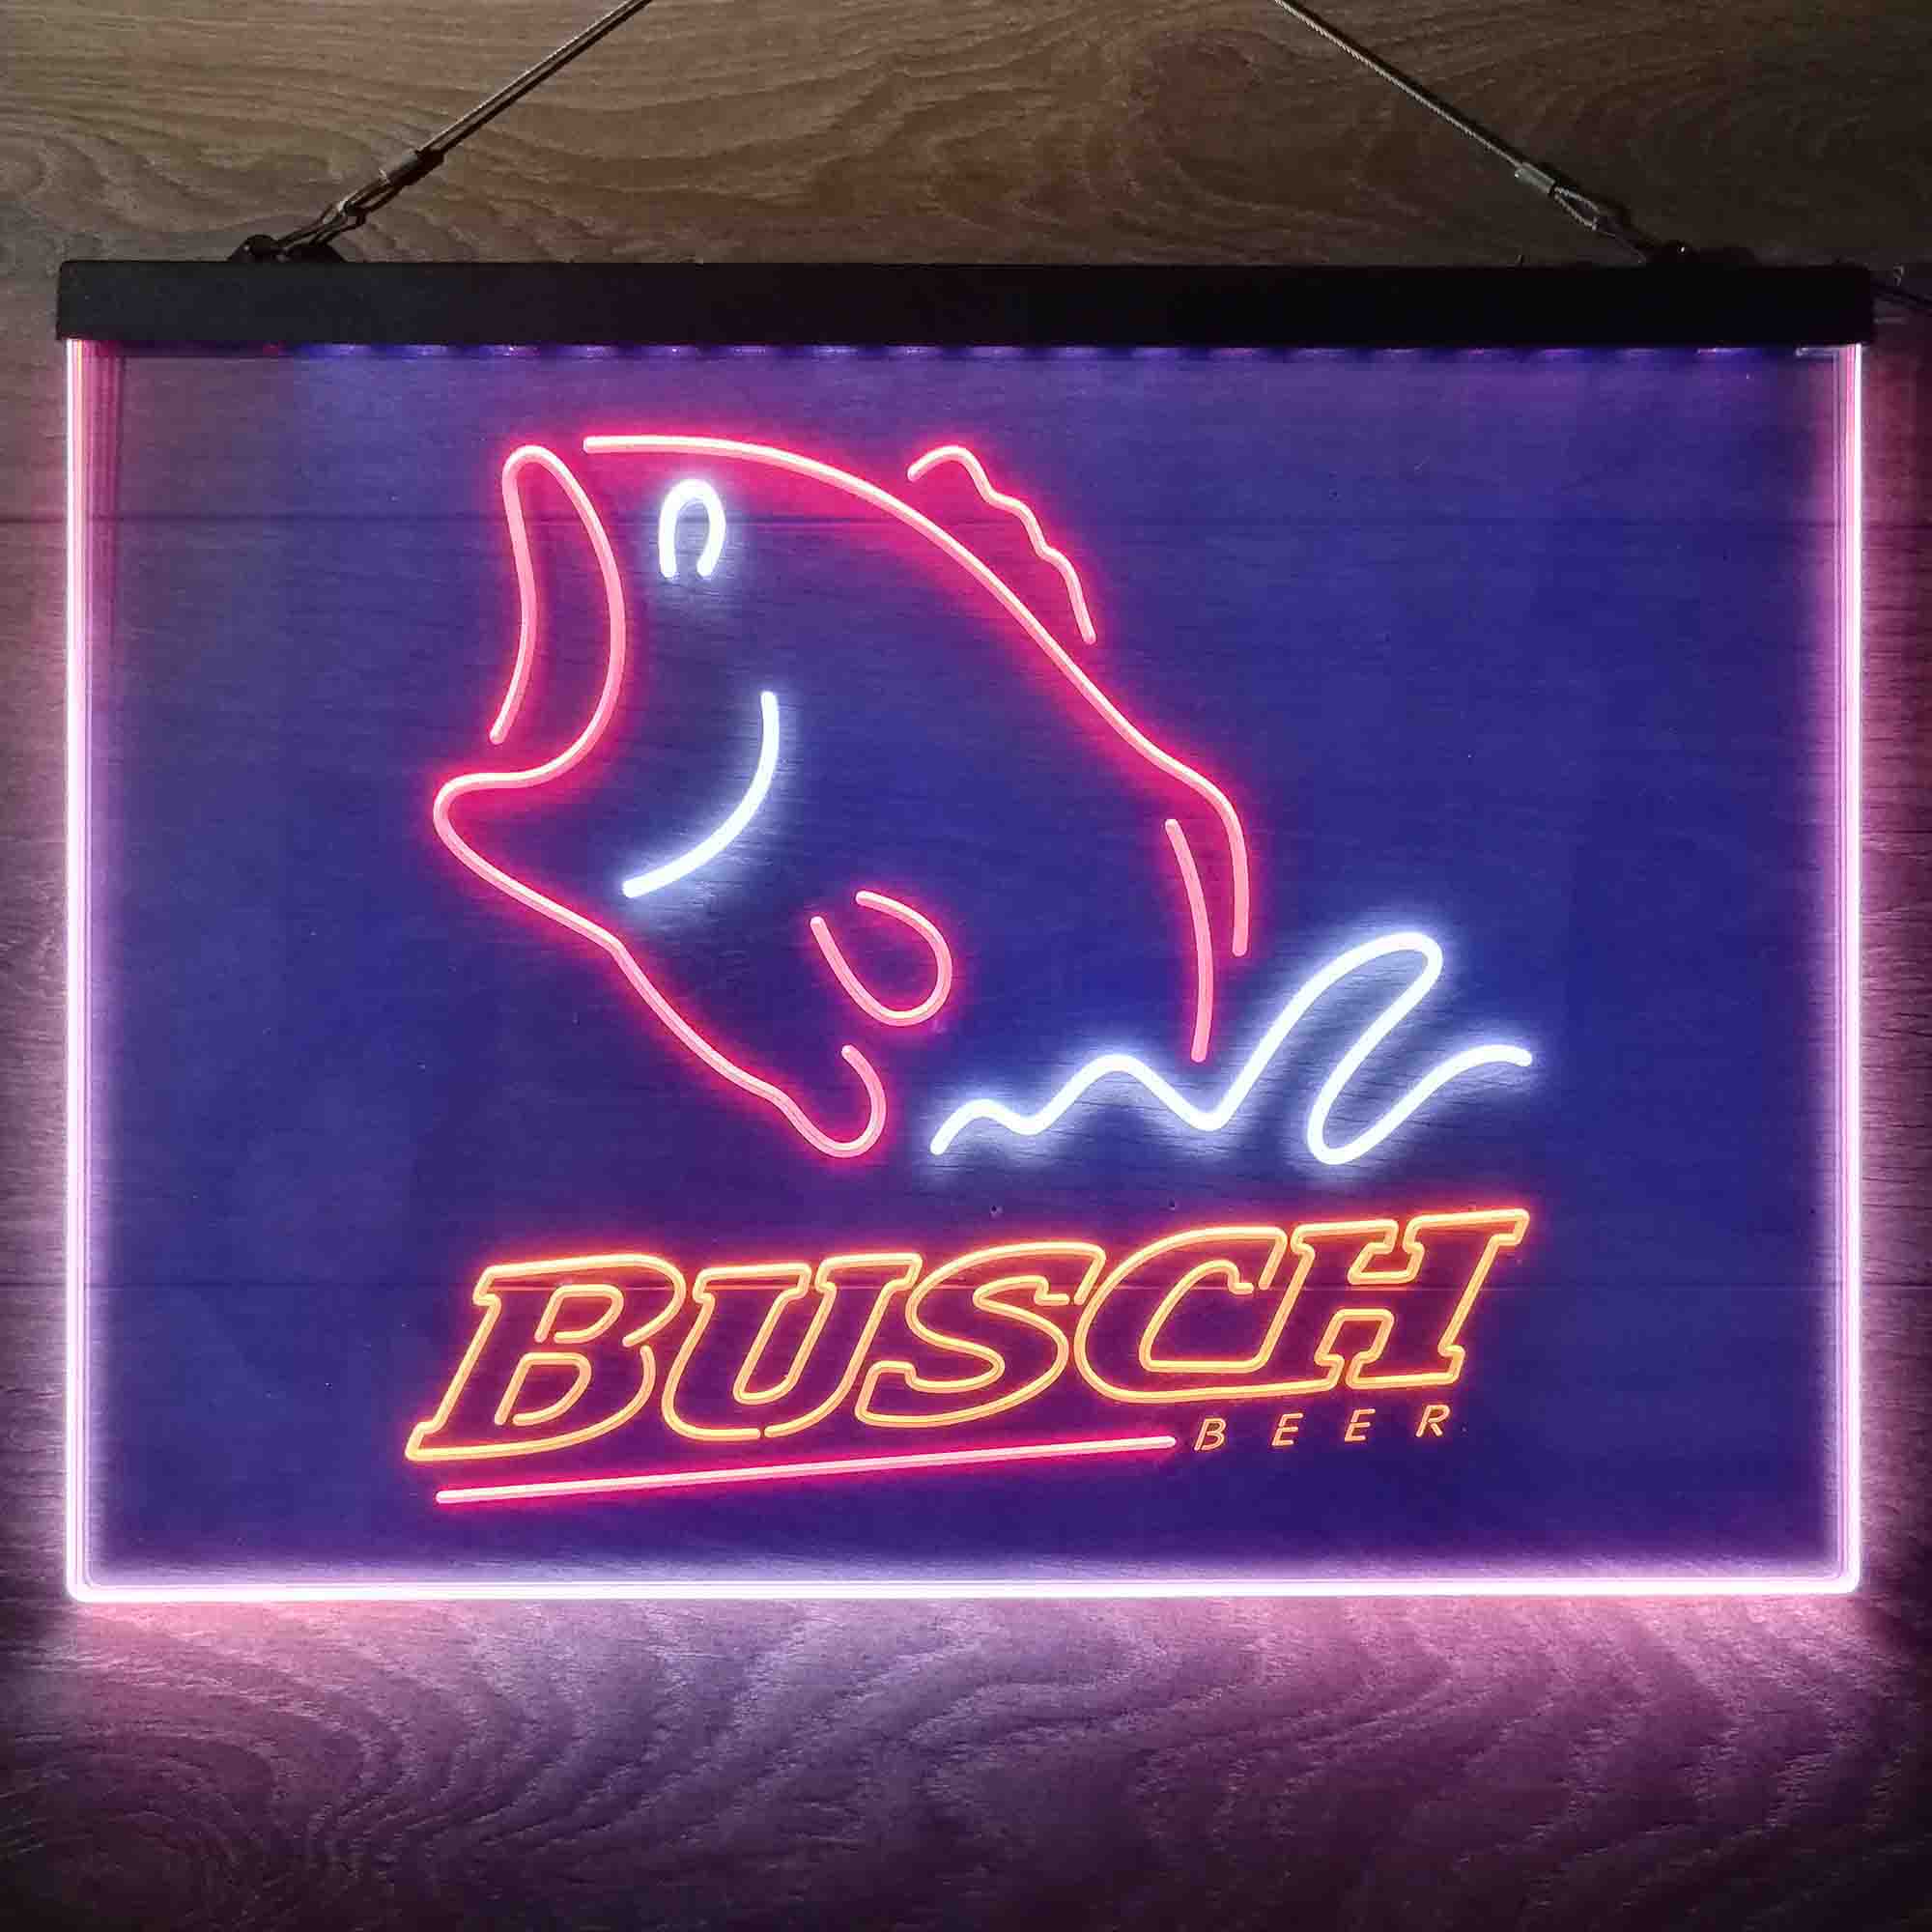 Busch Beer Fishing Camp Neon-Like LED Sign